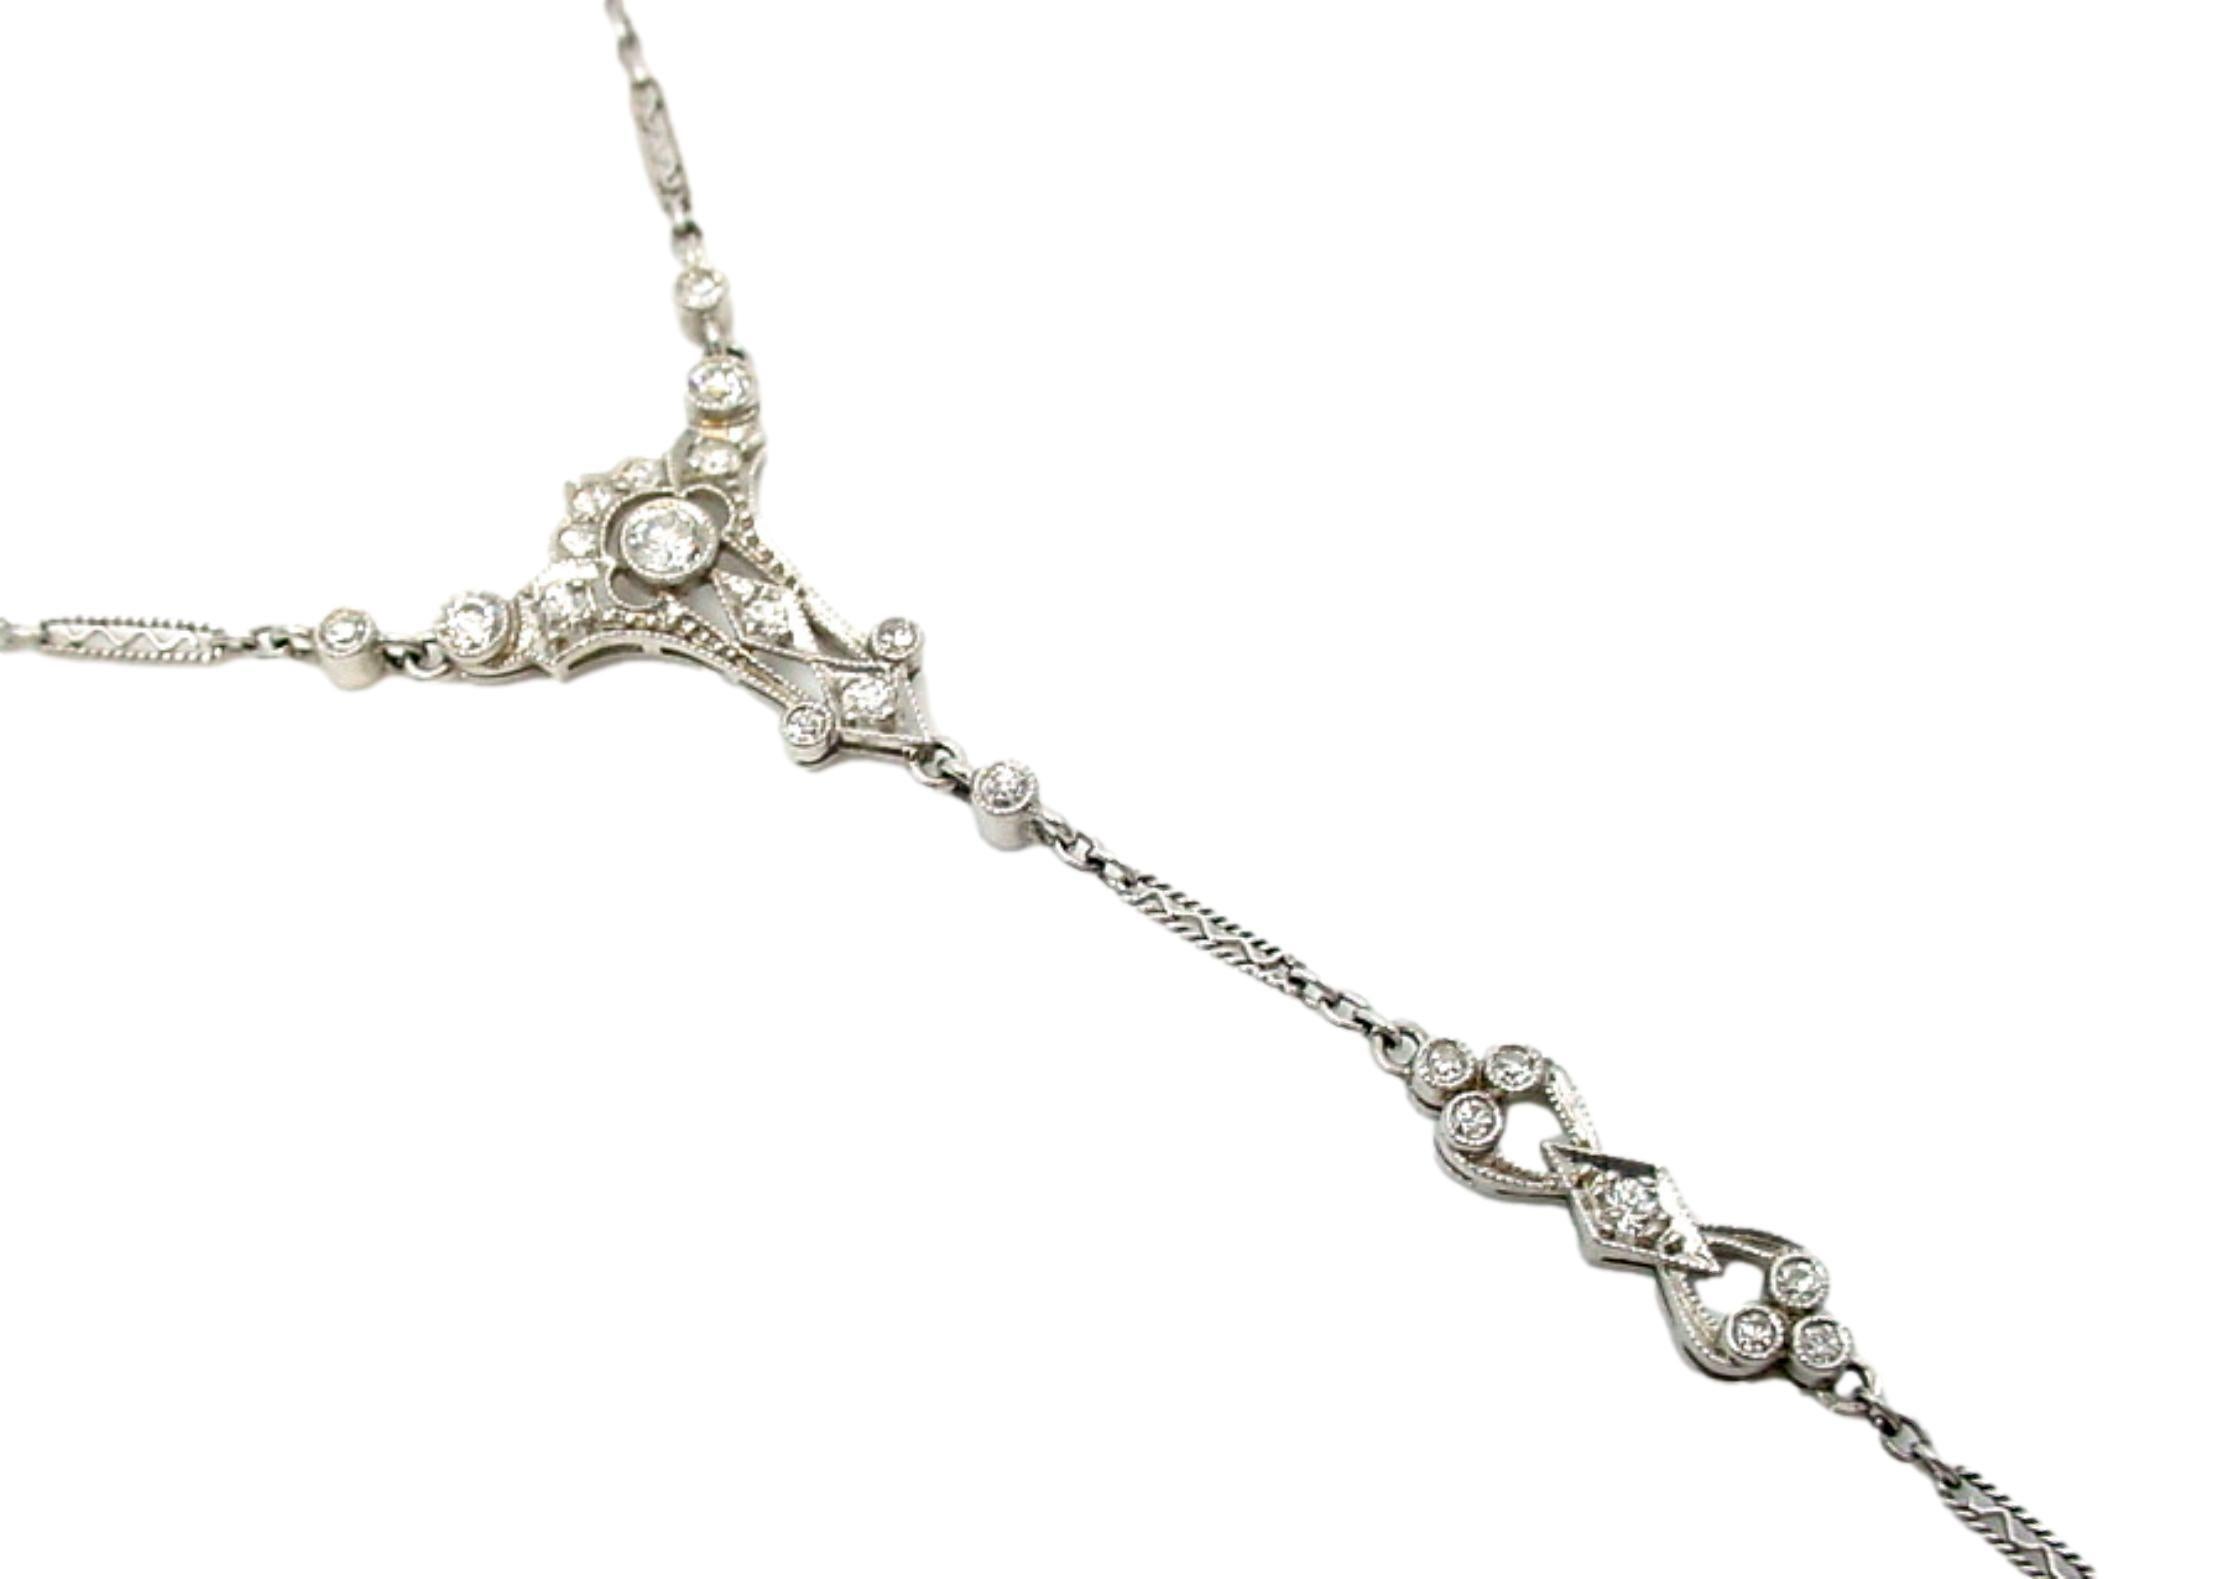 This exquisite accessory is one of the loveliest I've seen...  Crafted in sumptuous platinum the rectangular beauty suspends from a beautiful fancy link diamond set chain...

Designed as a pendant that converts into lorgnette glasses with